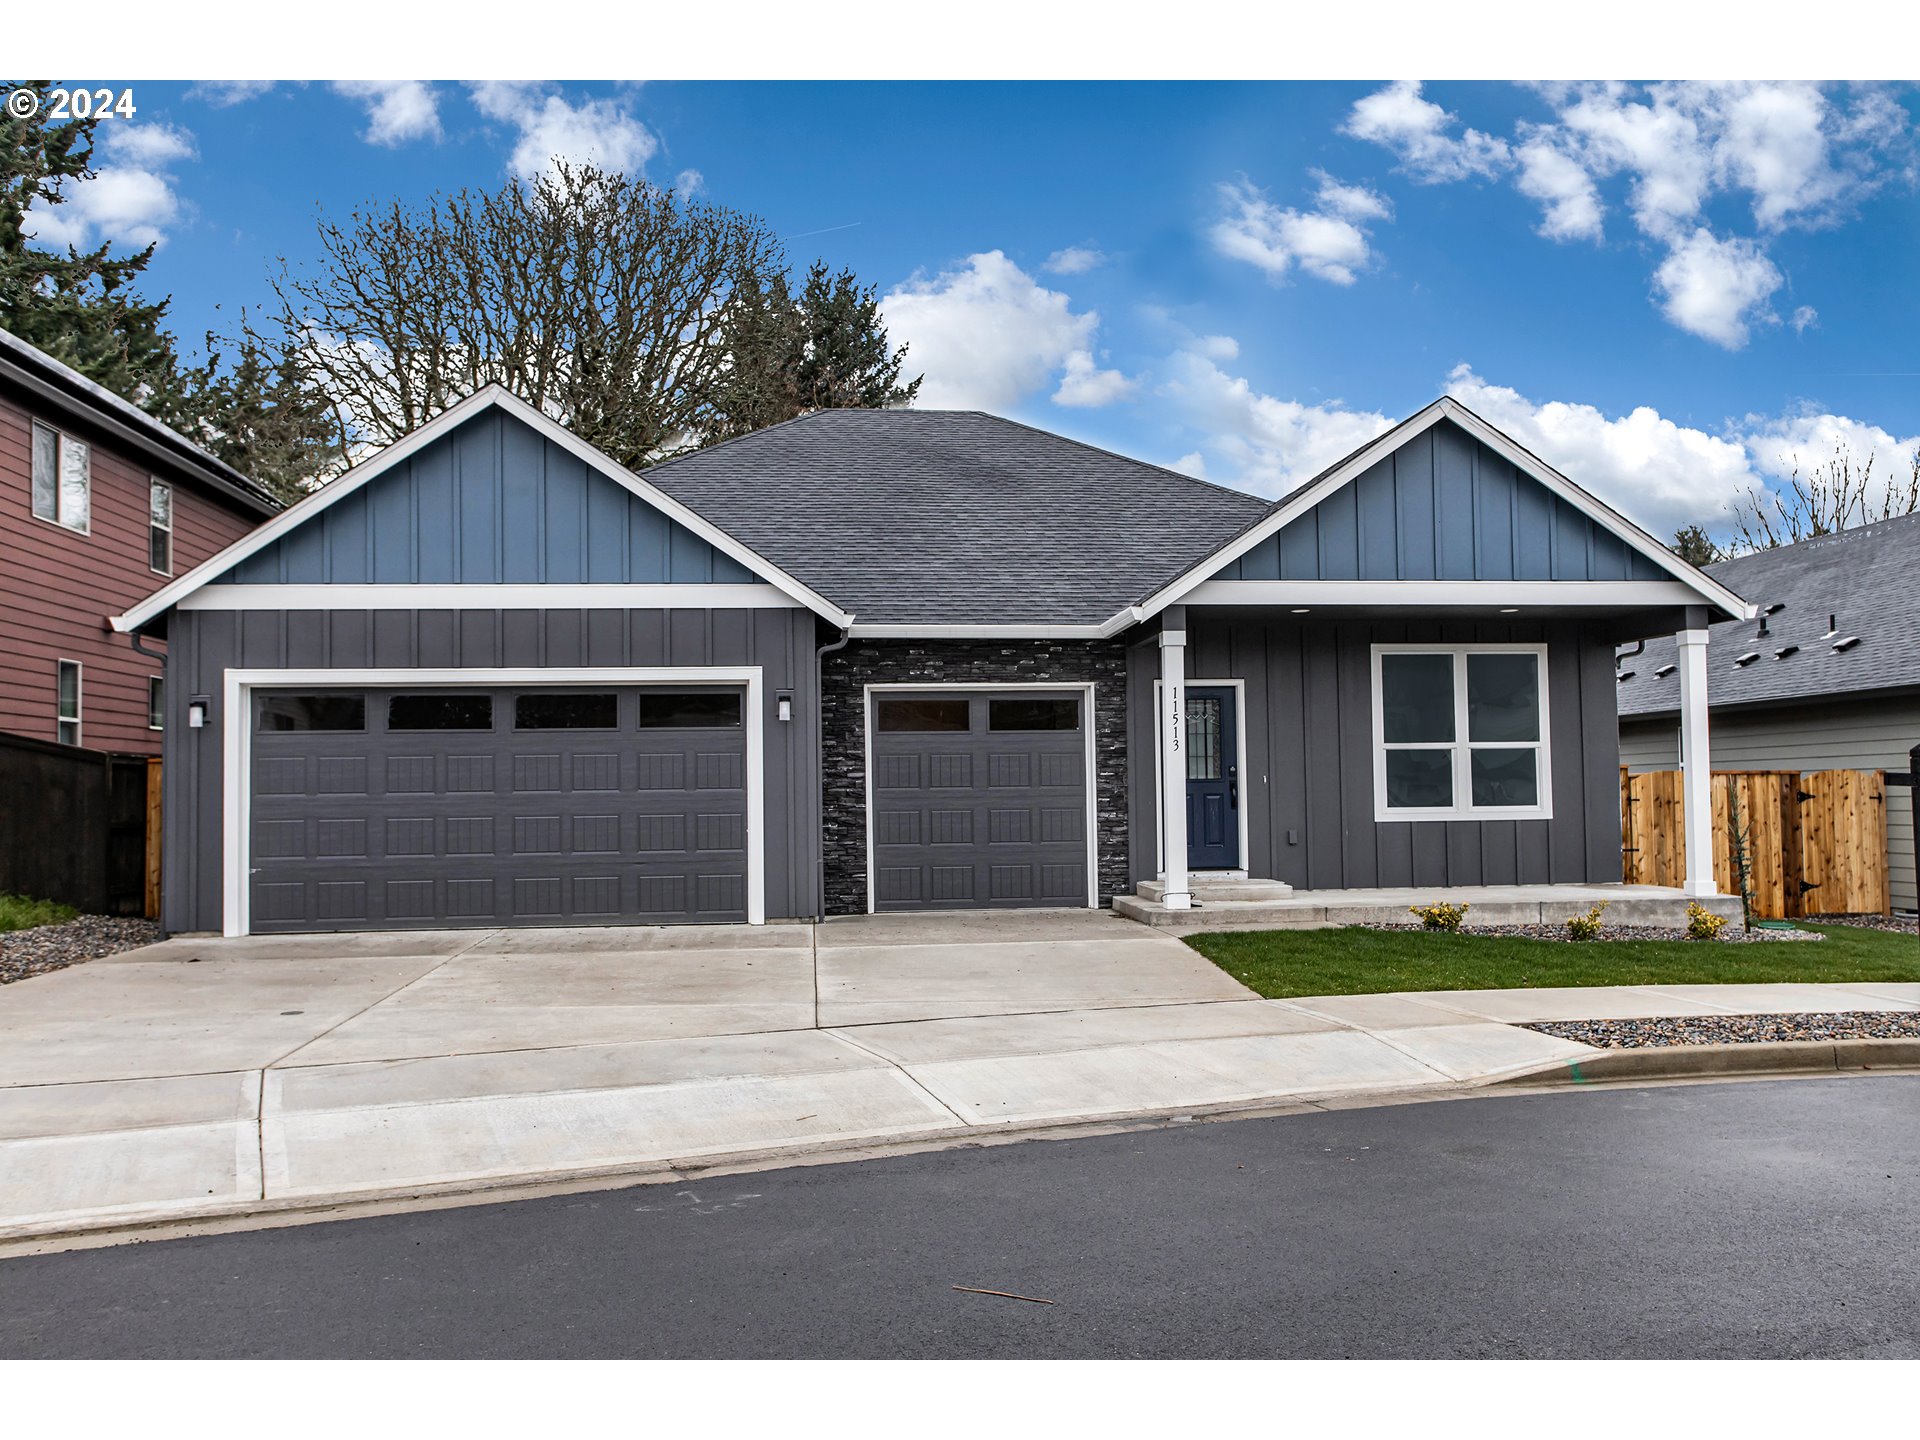 1111 NW 110th ST, Vancouver, WA 98685